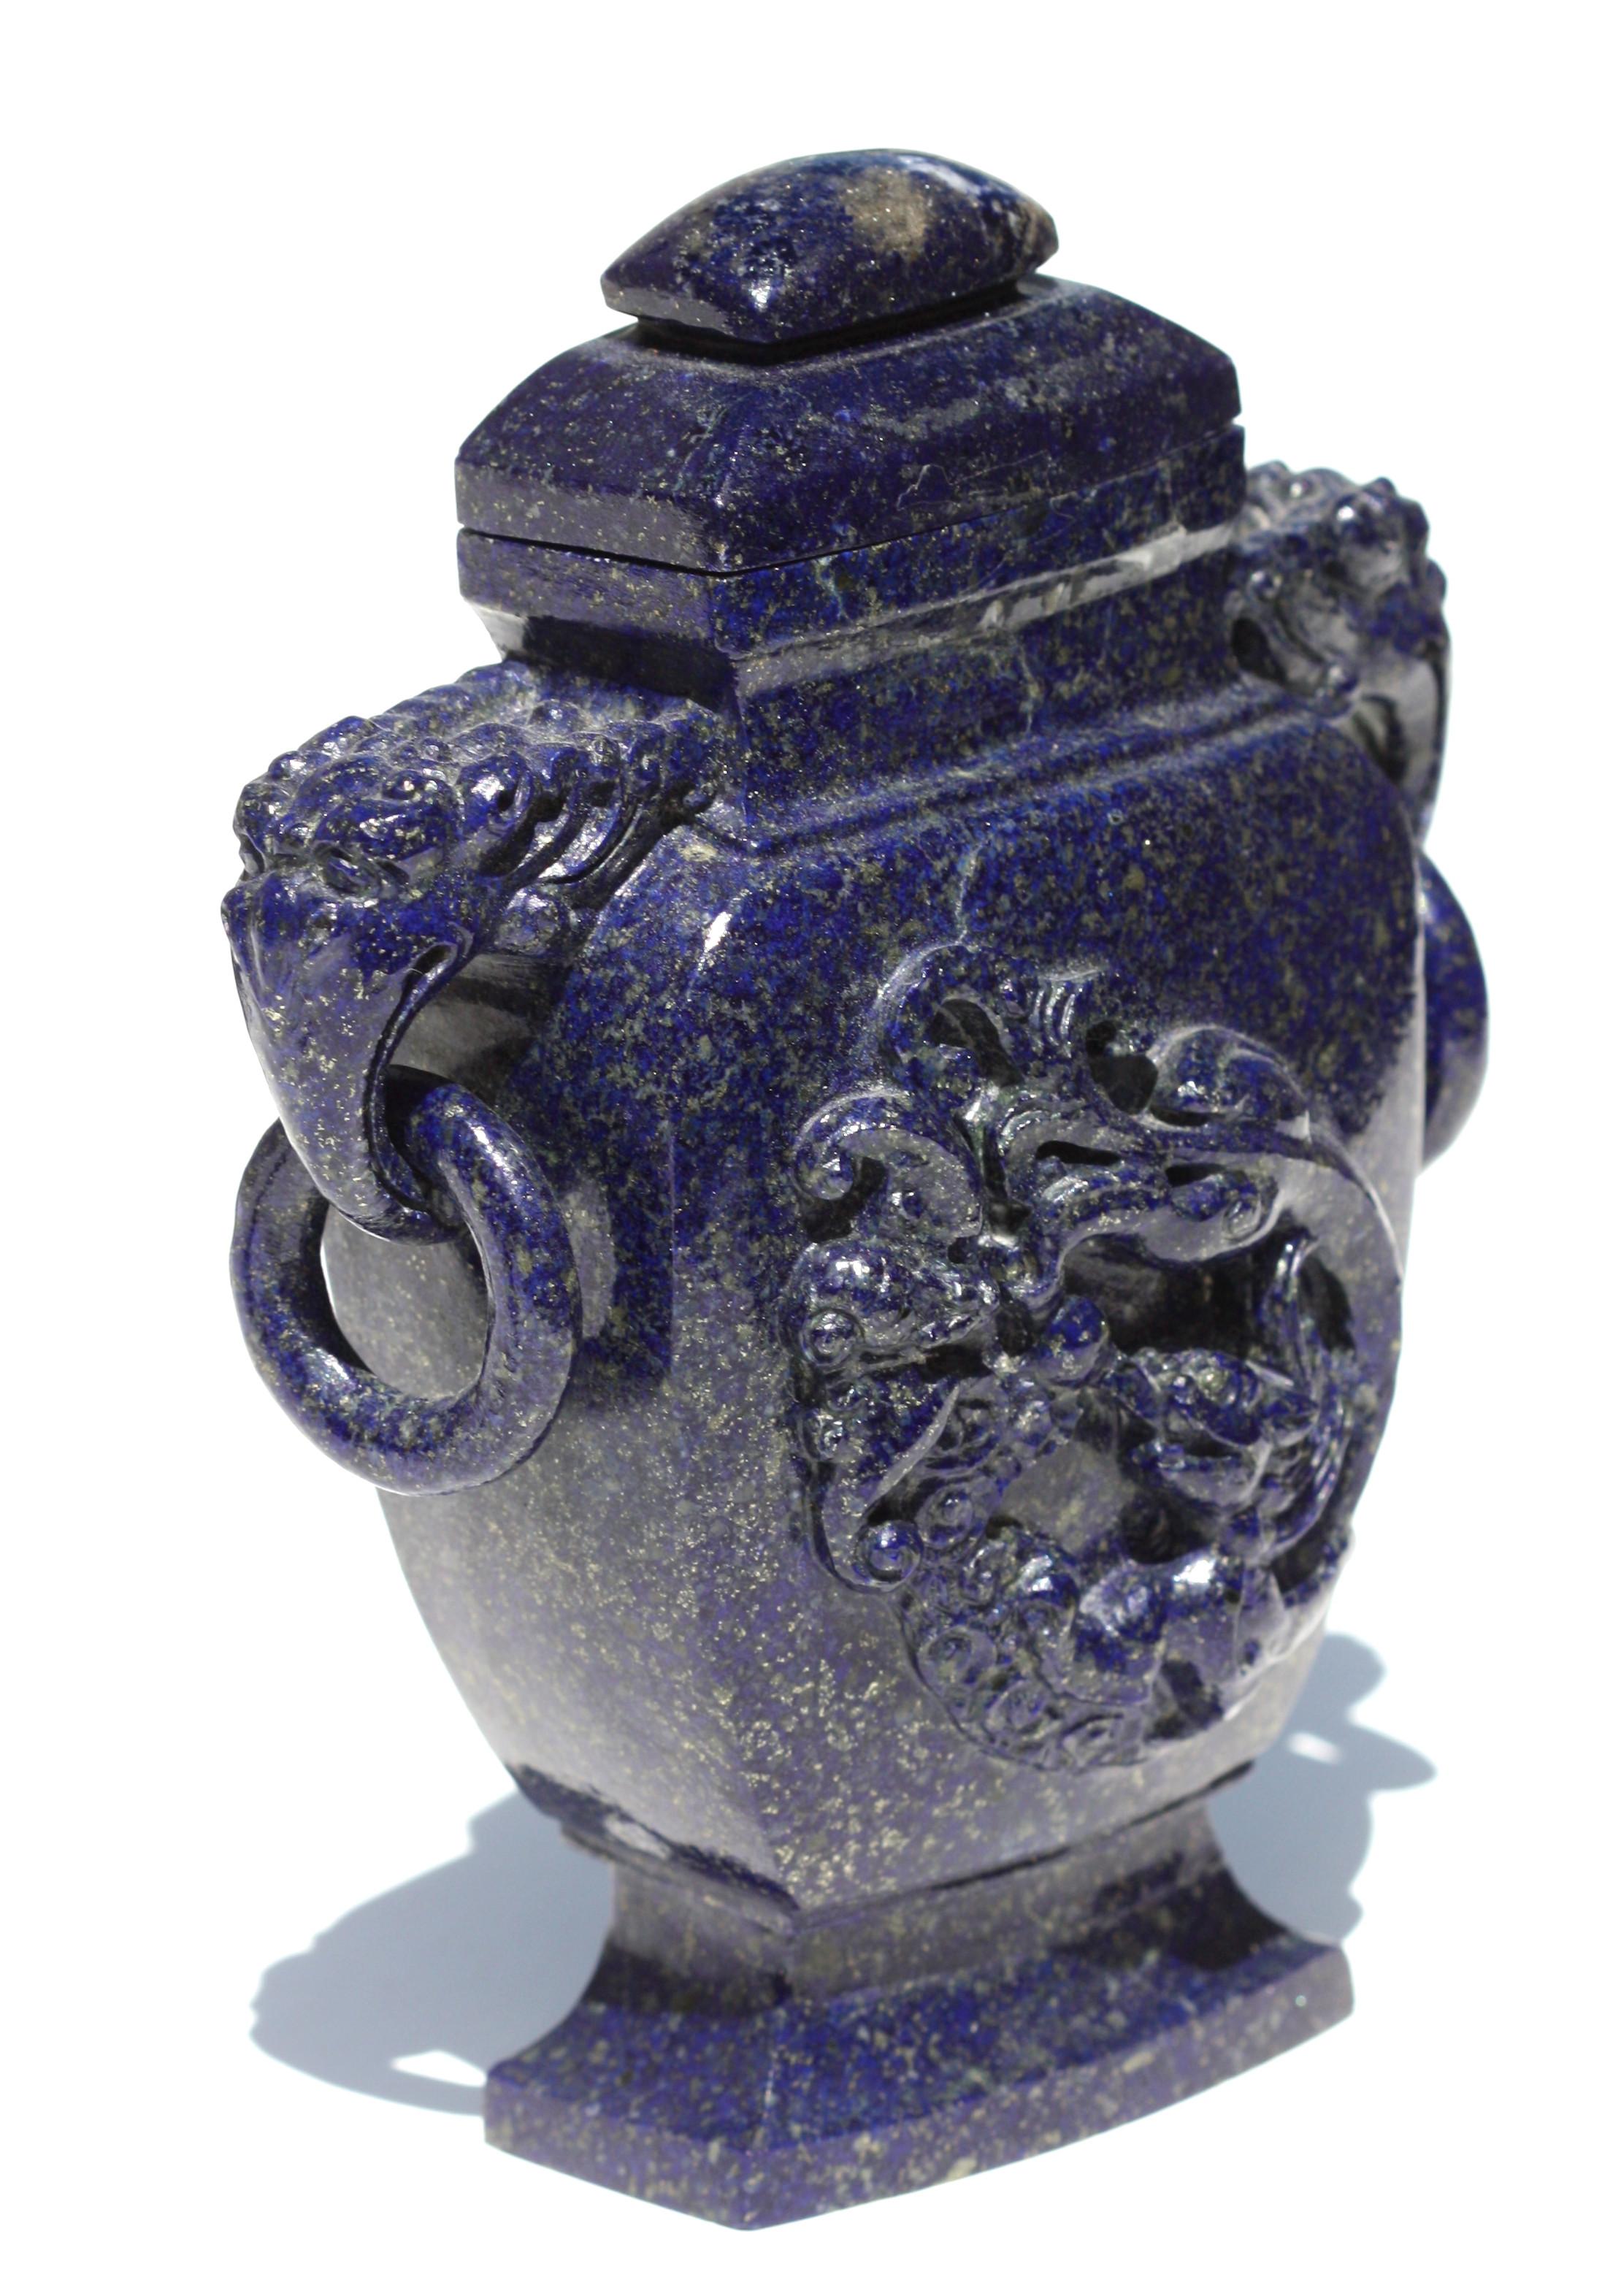 A Chinese carved Lapis-Lazuli vase and cover, 19th / 20th century,
flanked with elephant head handles supporting loose rings, side carved with a low relief carved dragon the other uncarved, resting on a flared foot. Measures: height 5.75 in. (14.60